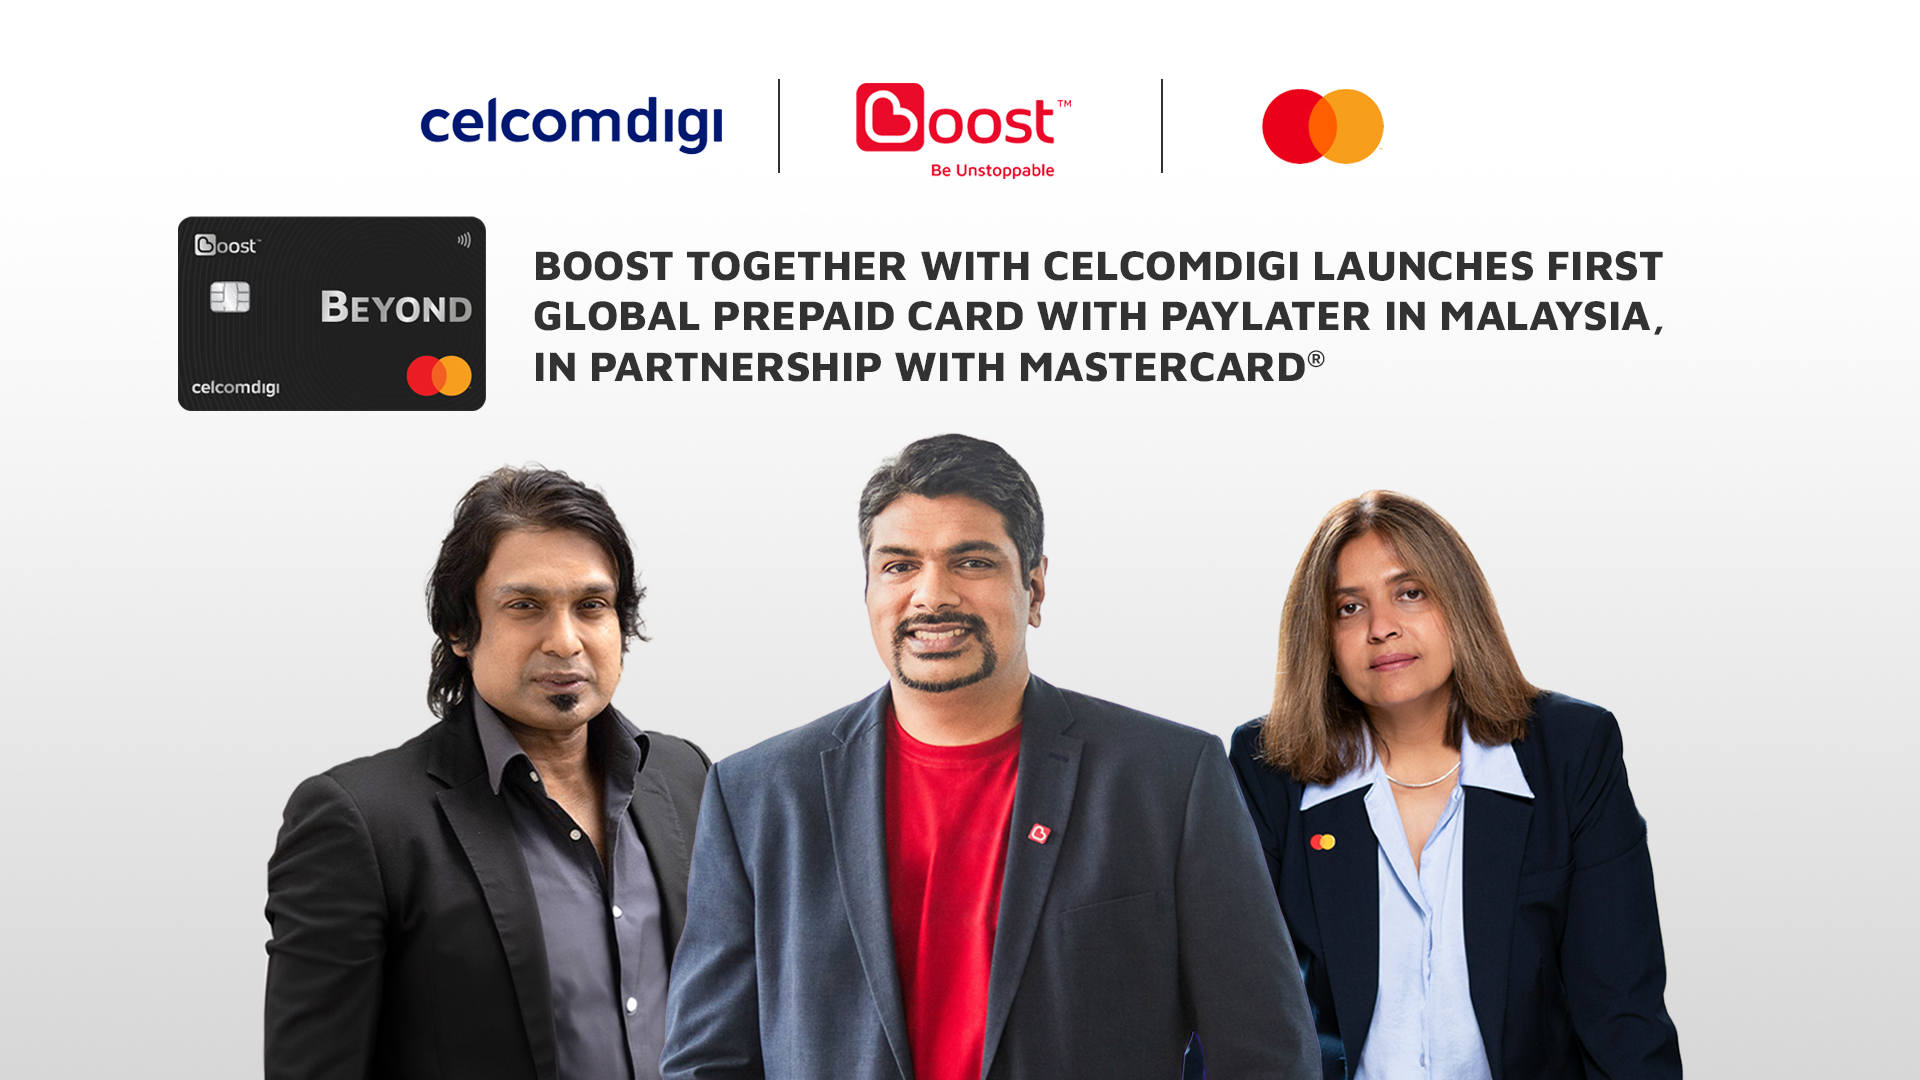 Left to Right: T Kugan, Chief Innovation Officer of CelcomDigi, Sheyantha Abeykoon, group CEO of Boost & Beena Pothen, country manager, Malaysia & Brunei, Mastercard